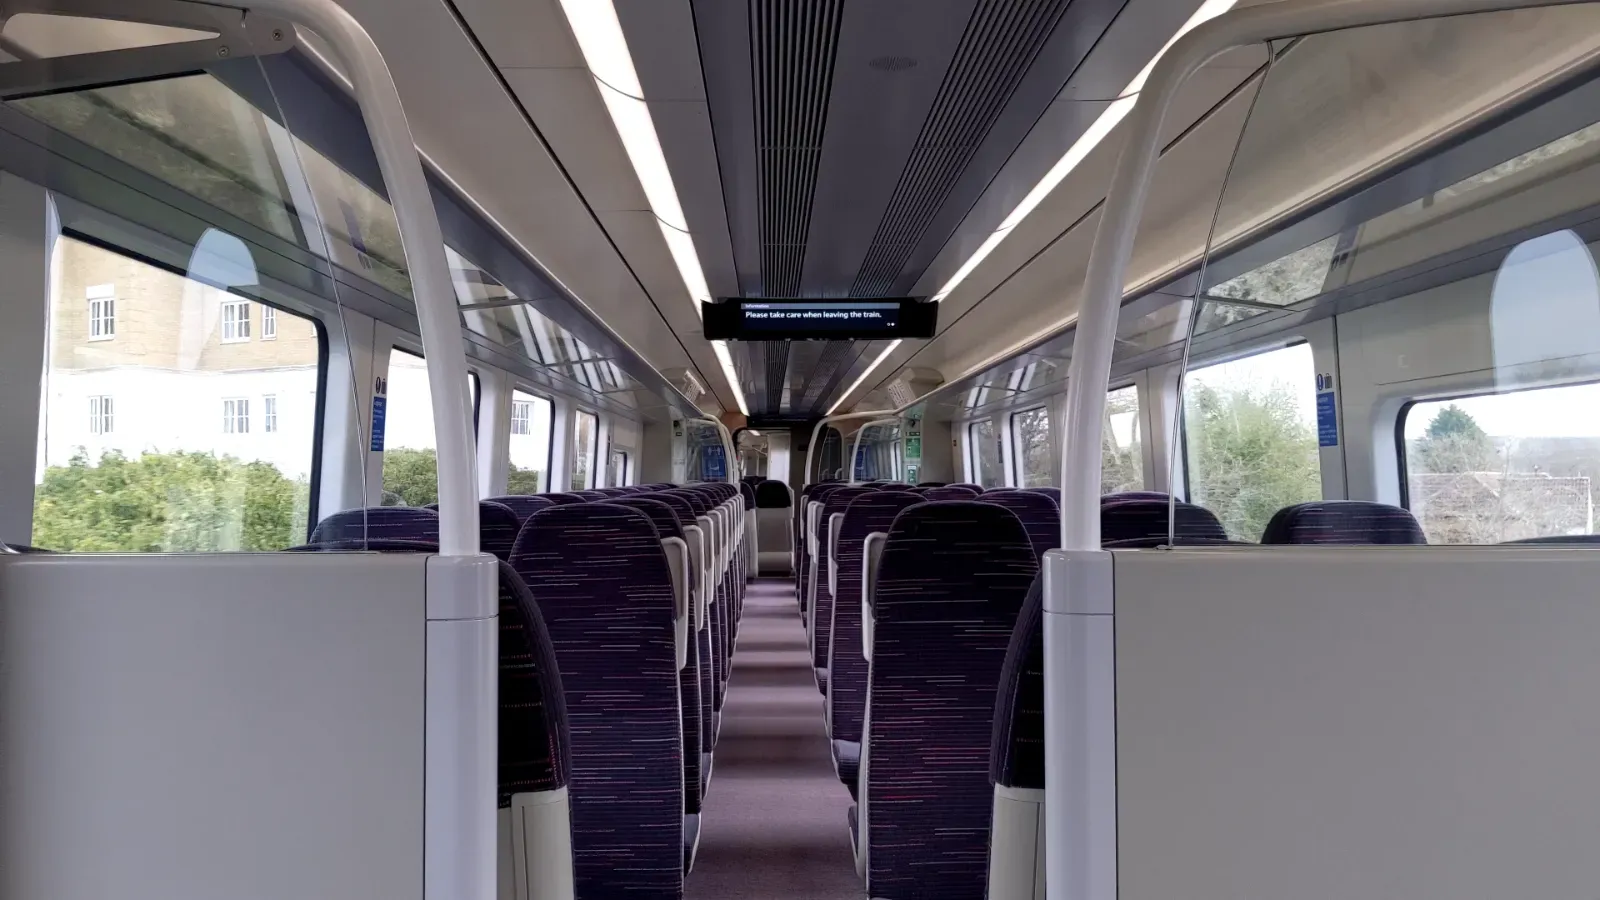 Sets of two seats are seen on the left and sets of three seats are seen on the right, leaving a narrow path between them. On the seats are grey grab handles.